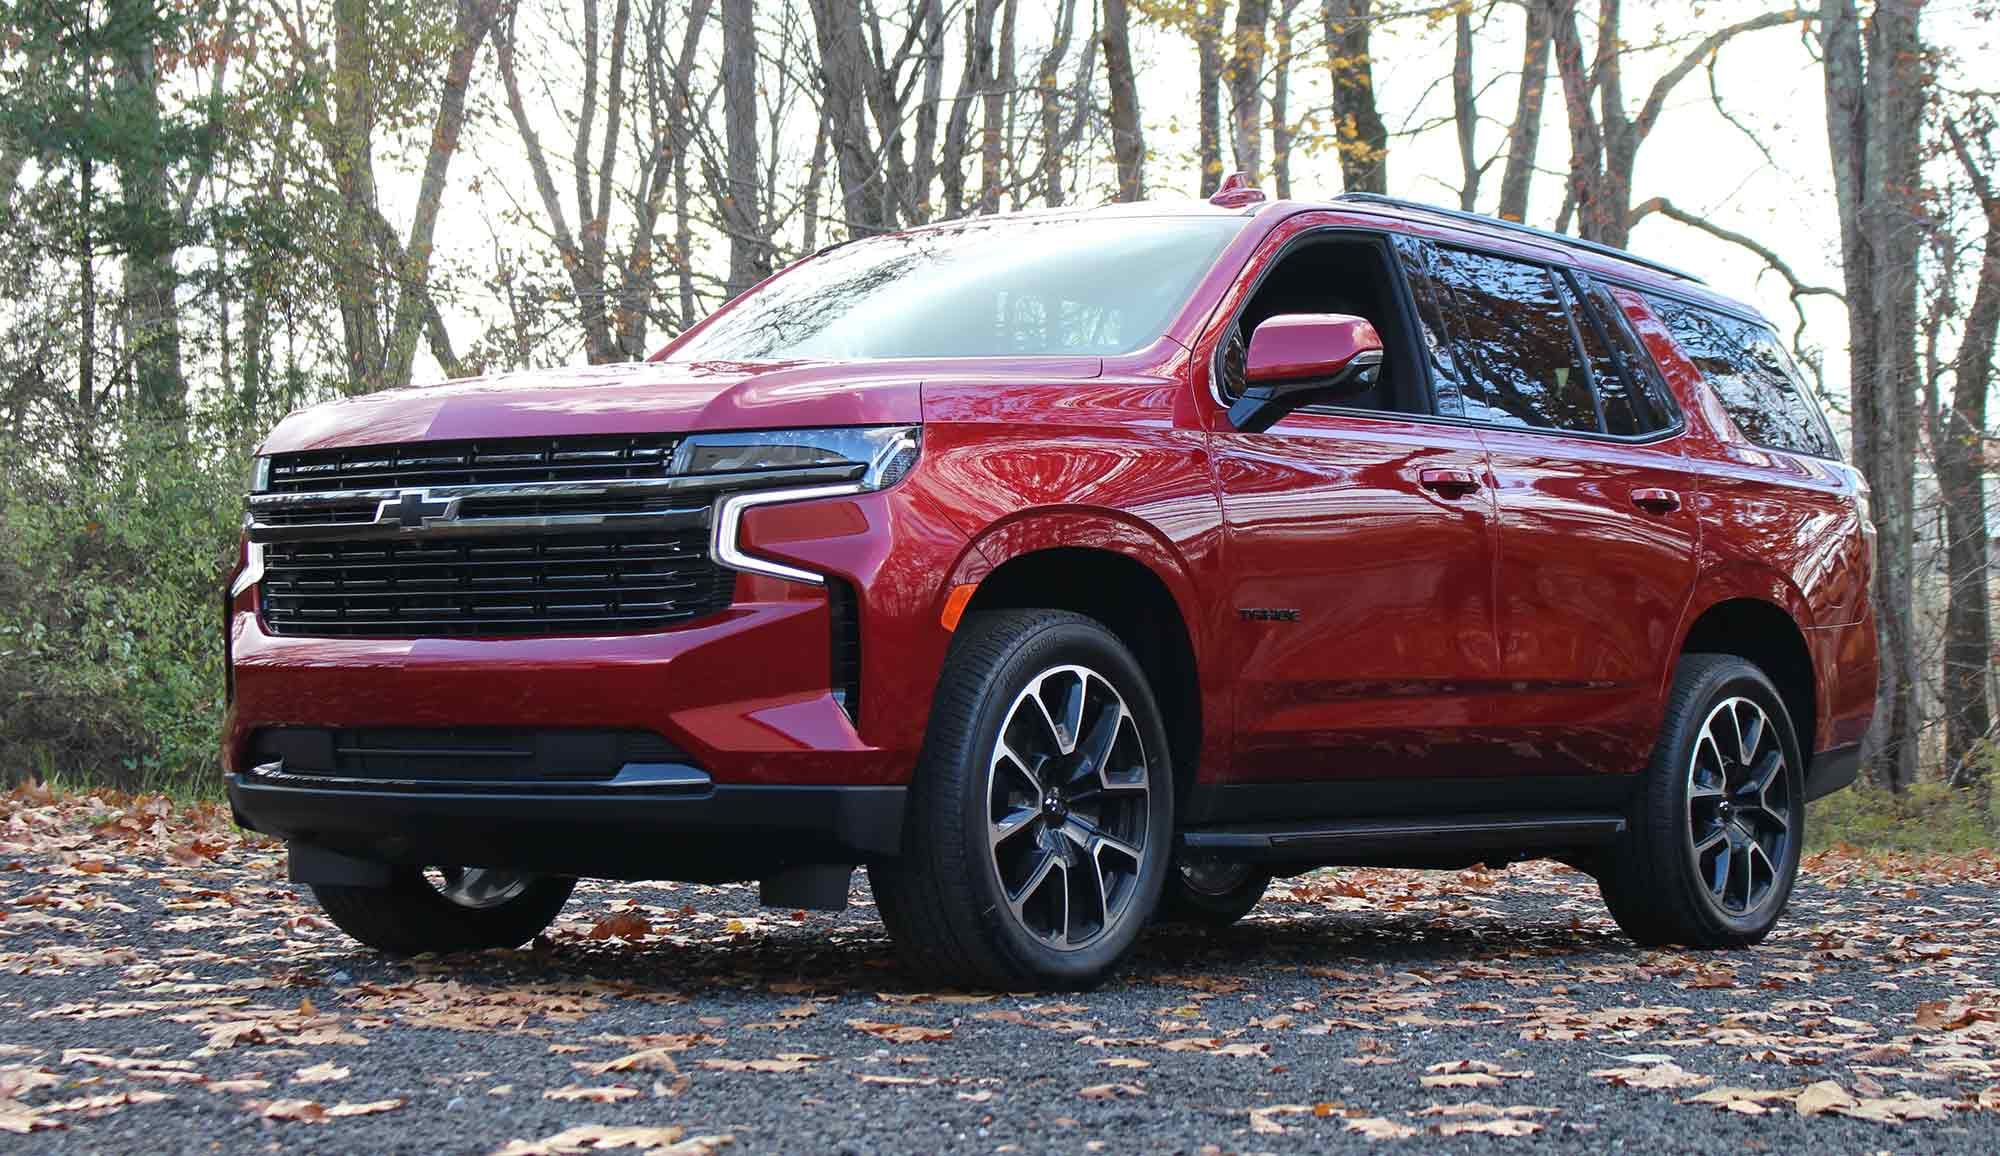 It’s not that we dislike the RST, it’s just that we prefer the Z71 with the baby Duramax to the 6.2L V-8 and 22-inch wheels that only add bragging rights and sporty looks to the package.